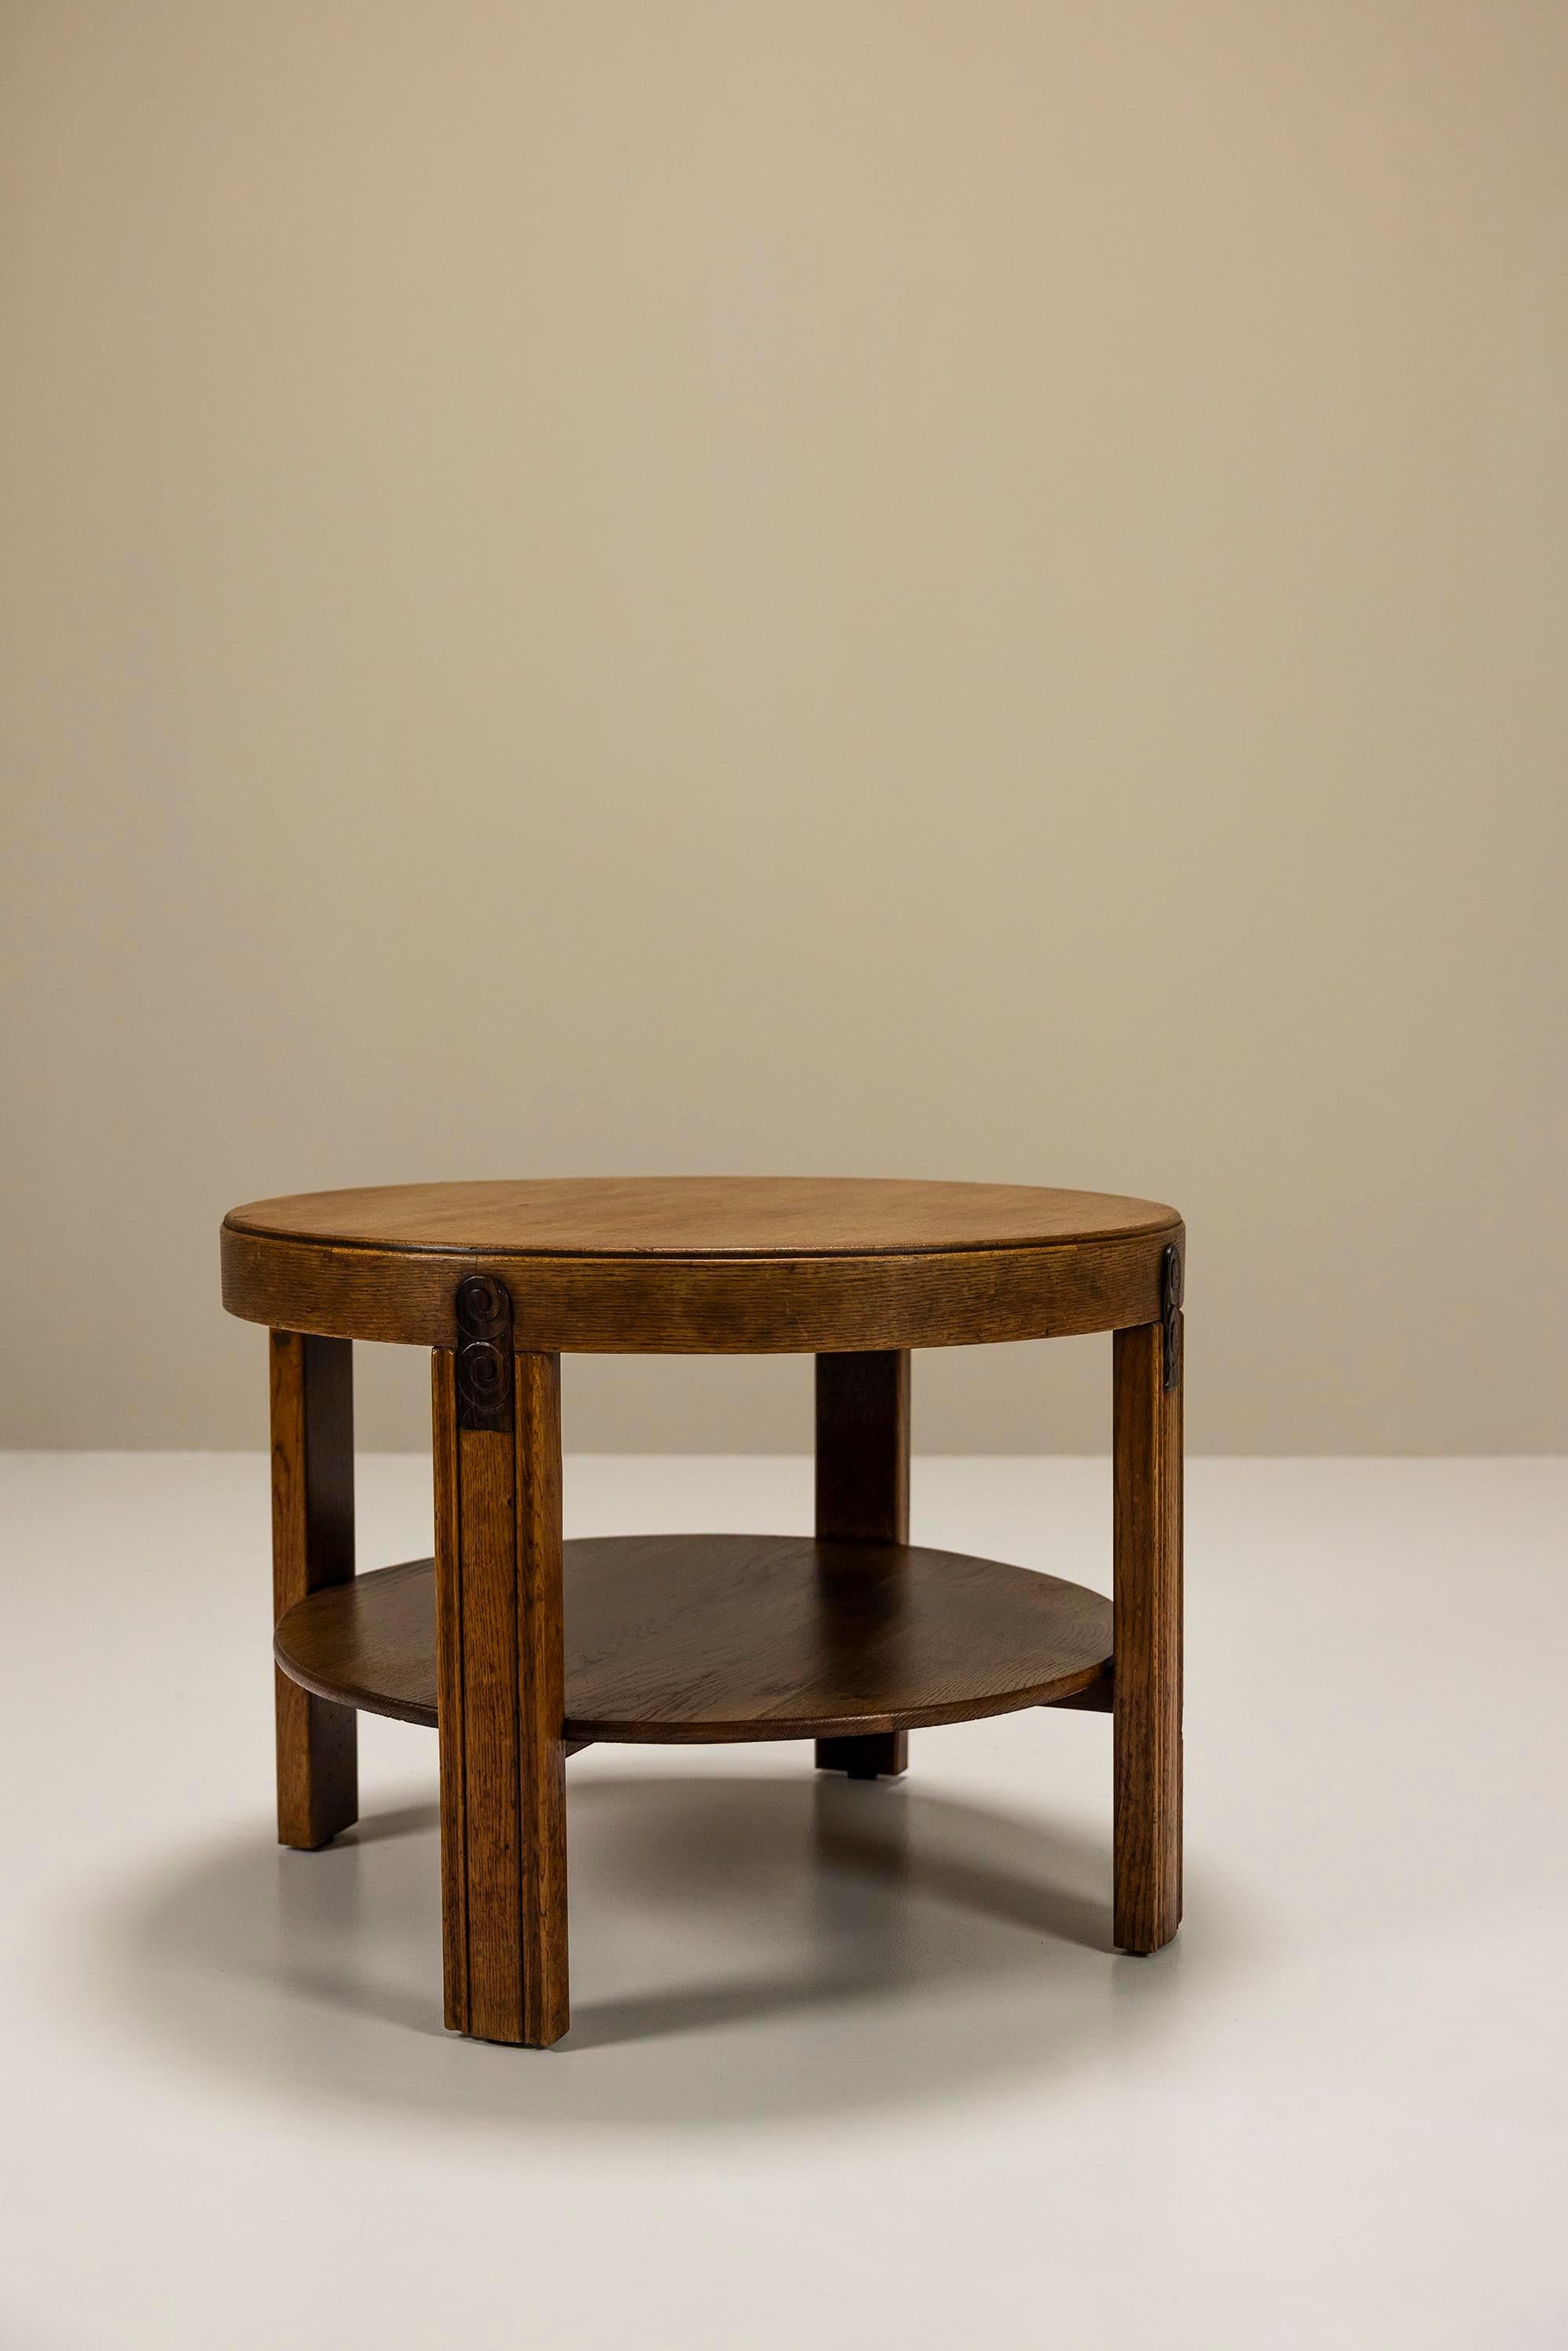 This modernist table is a typical design for the pre-war dutch period. It is a very minimalistic table with only subtle details. 

Design
This coffee- or sidetable has carved and gauched lines in the four legs. The connection between each leg and